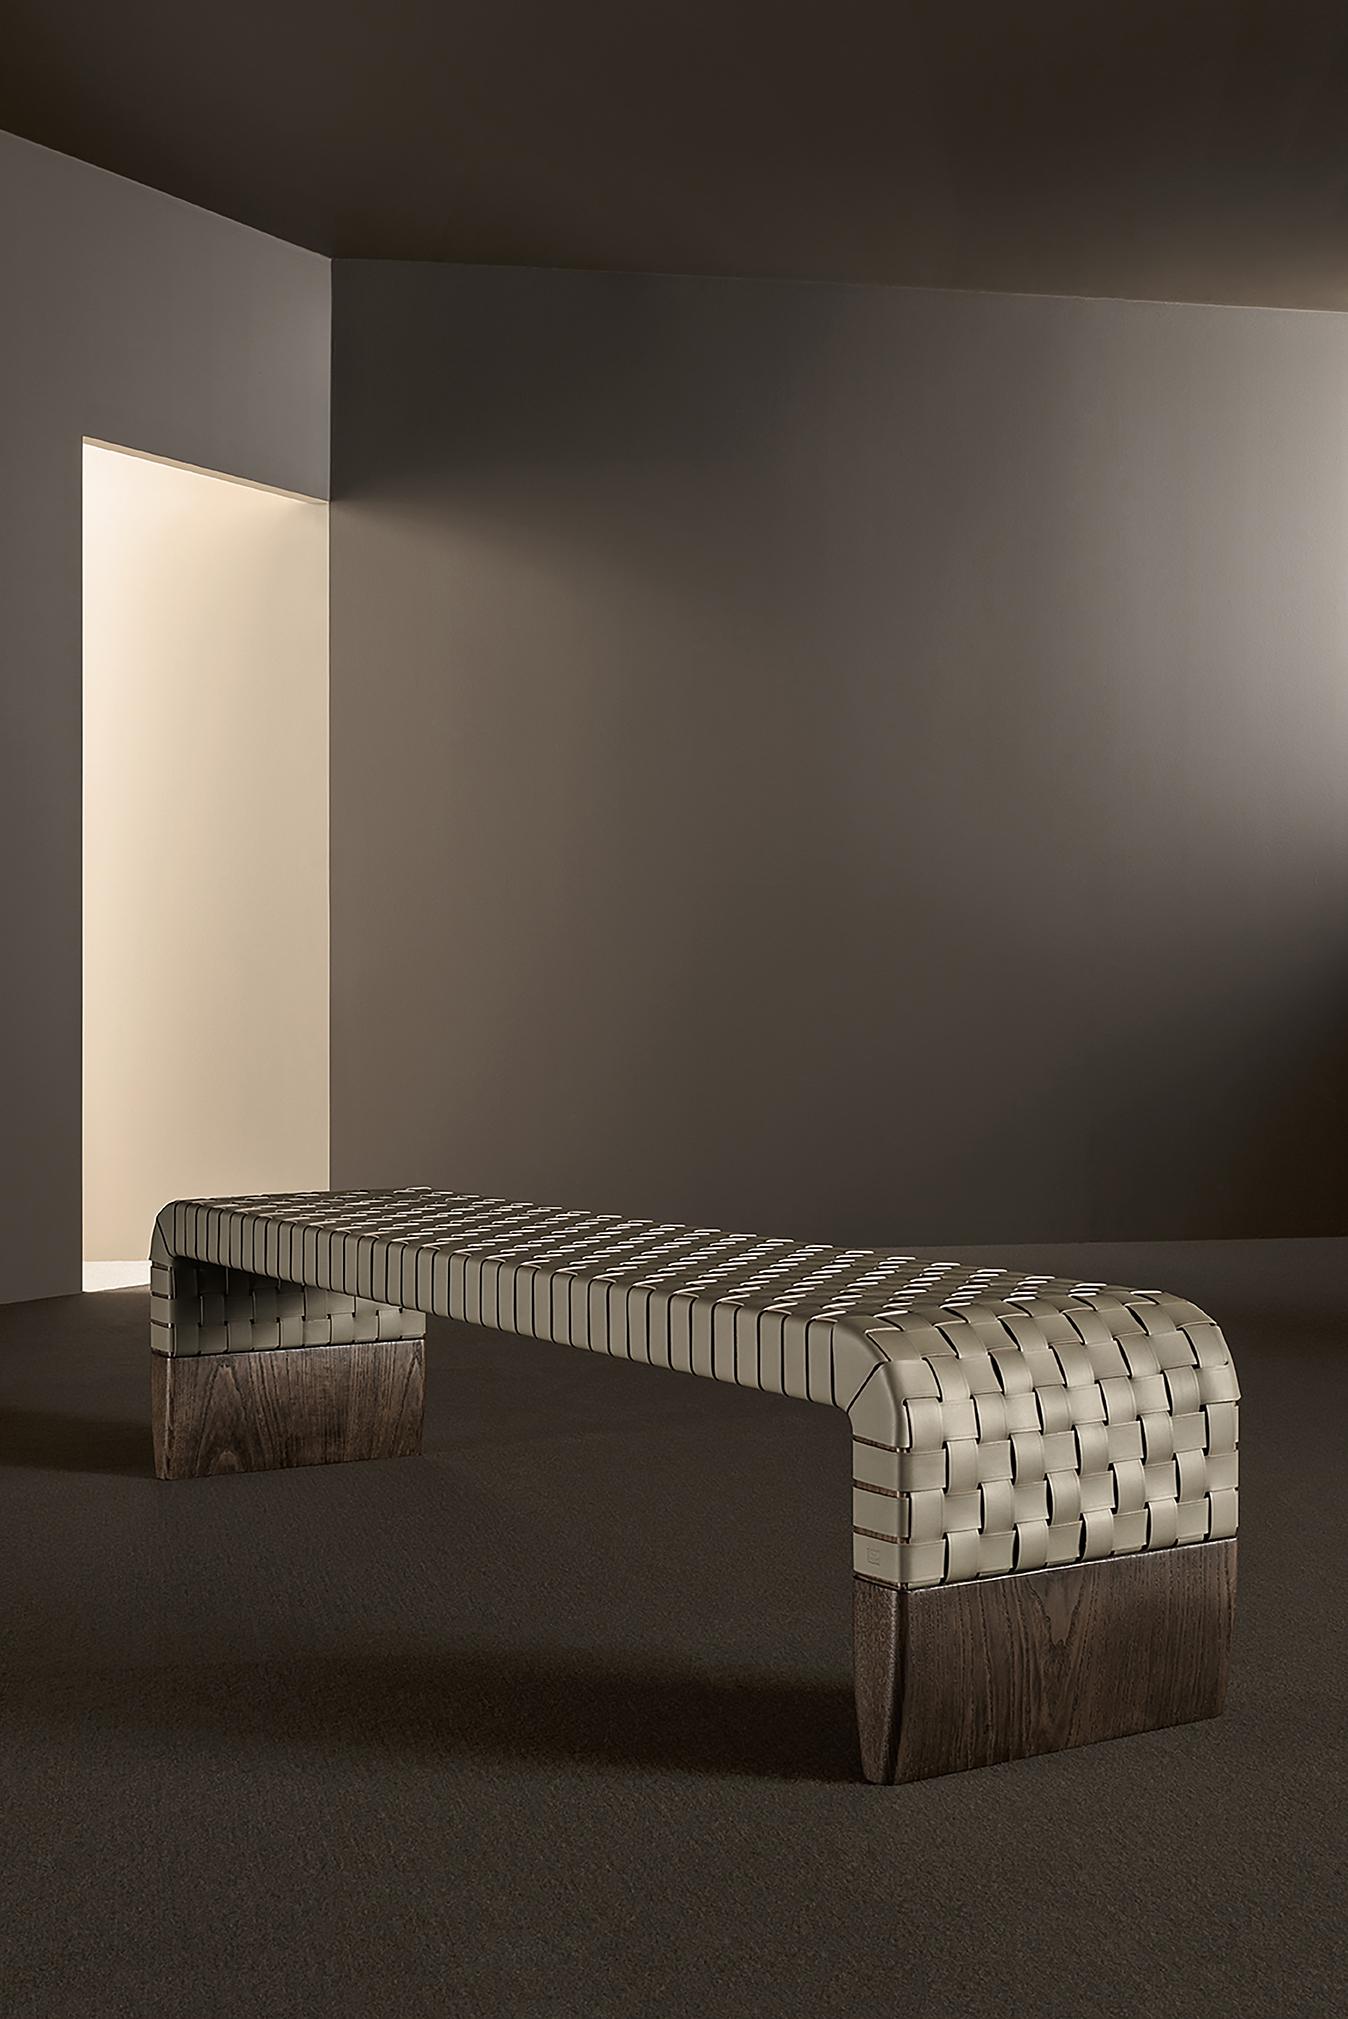 The simplicity of the design is fully consistent with the distinctiveness of the leather weave that upholsters the bench seating surface. The overall eff ect is linear, sophisticated and highly modern